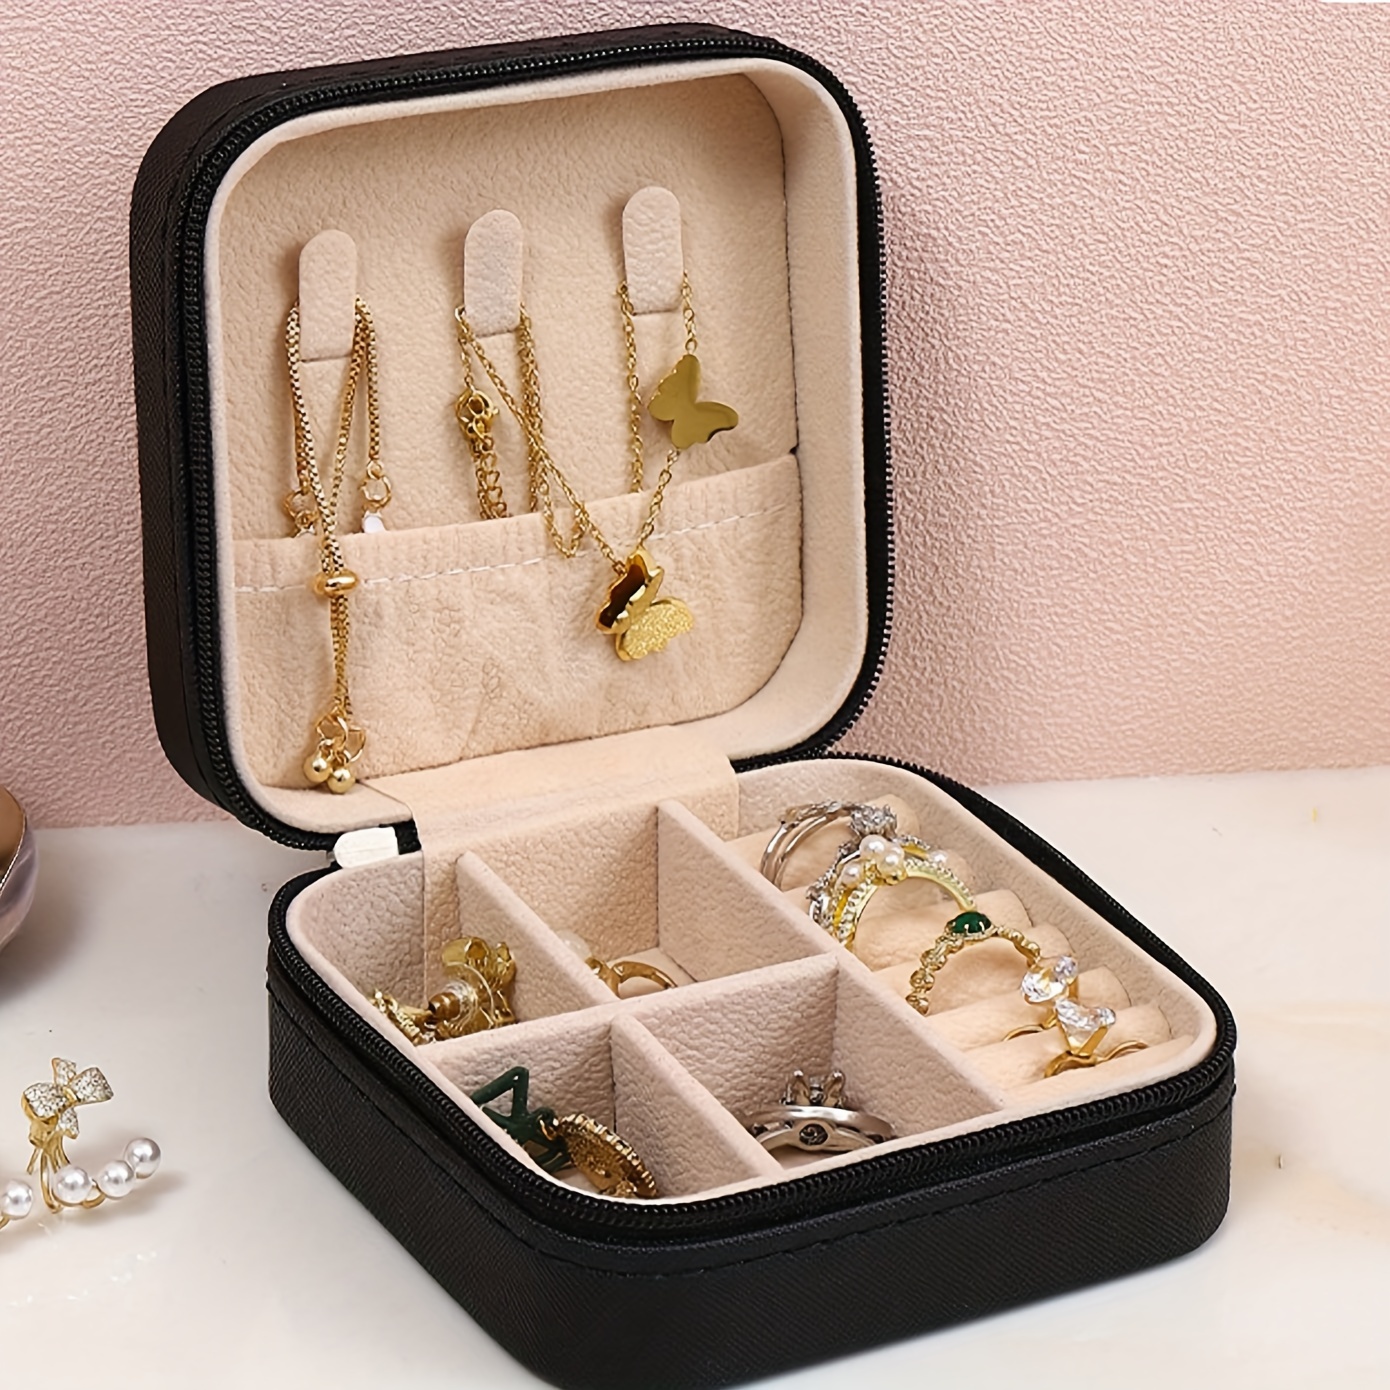 1pc Jewelry Storage Tray For Rings, Earrings, And Small Accessories